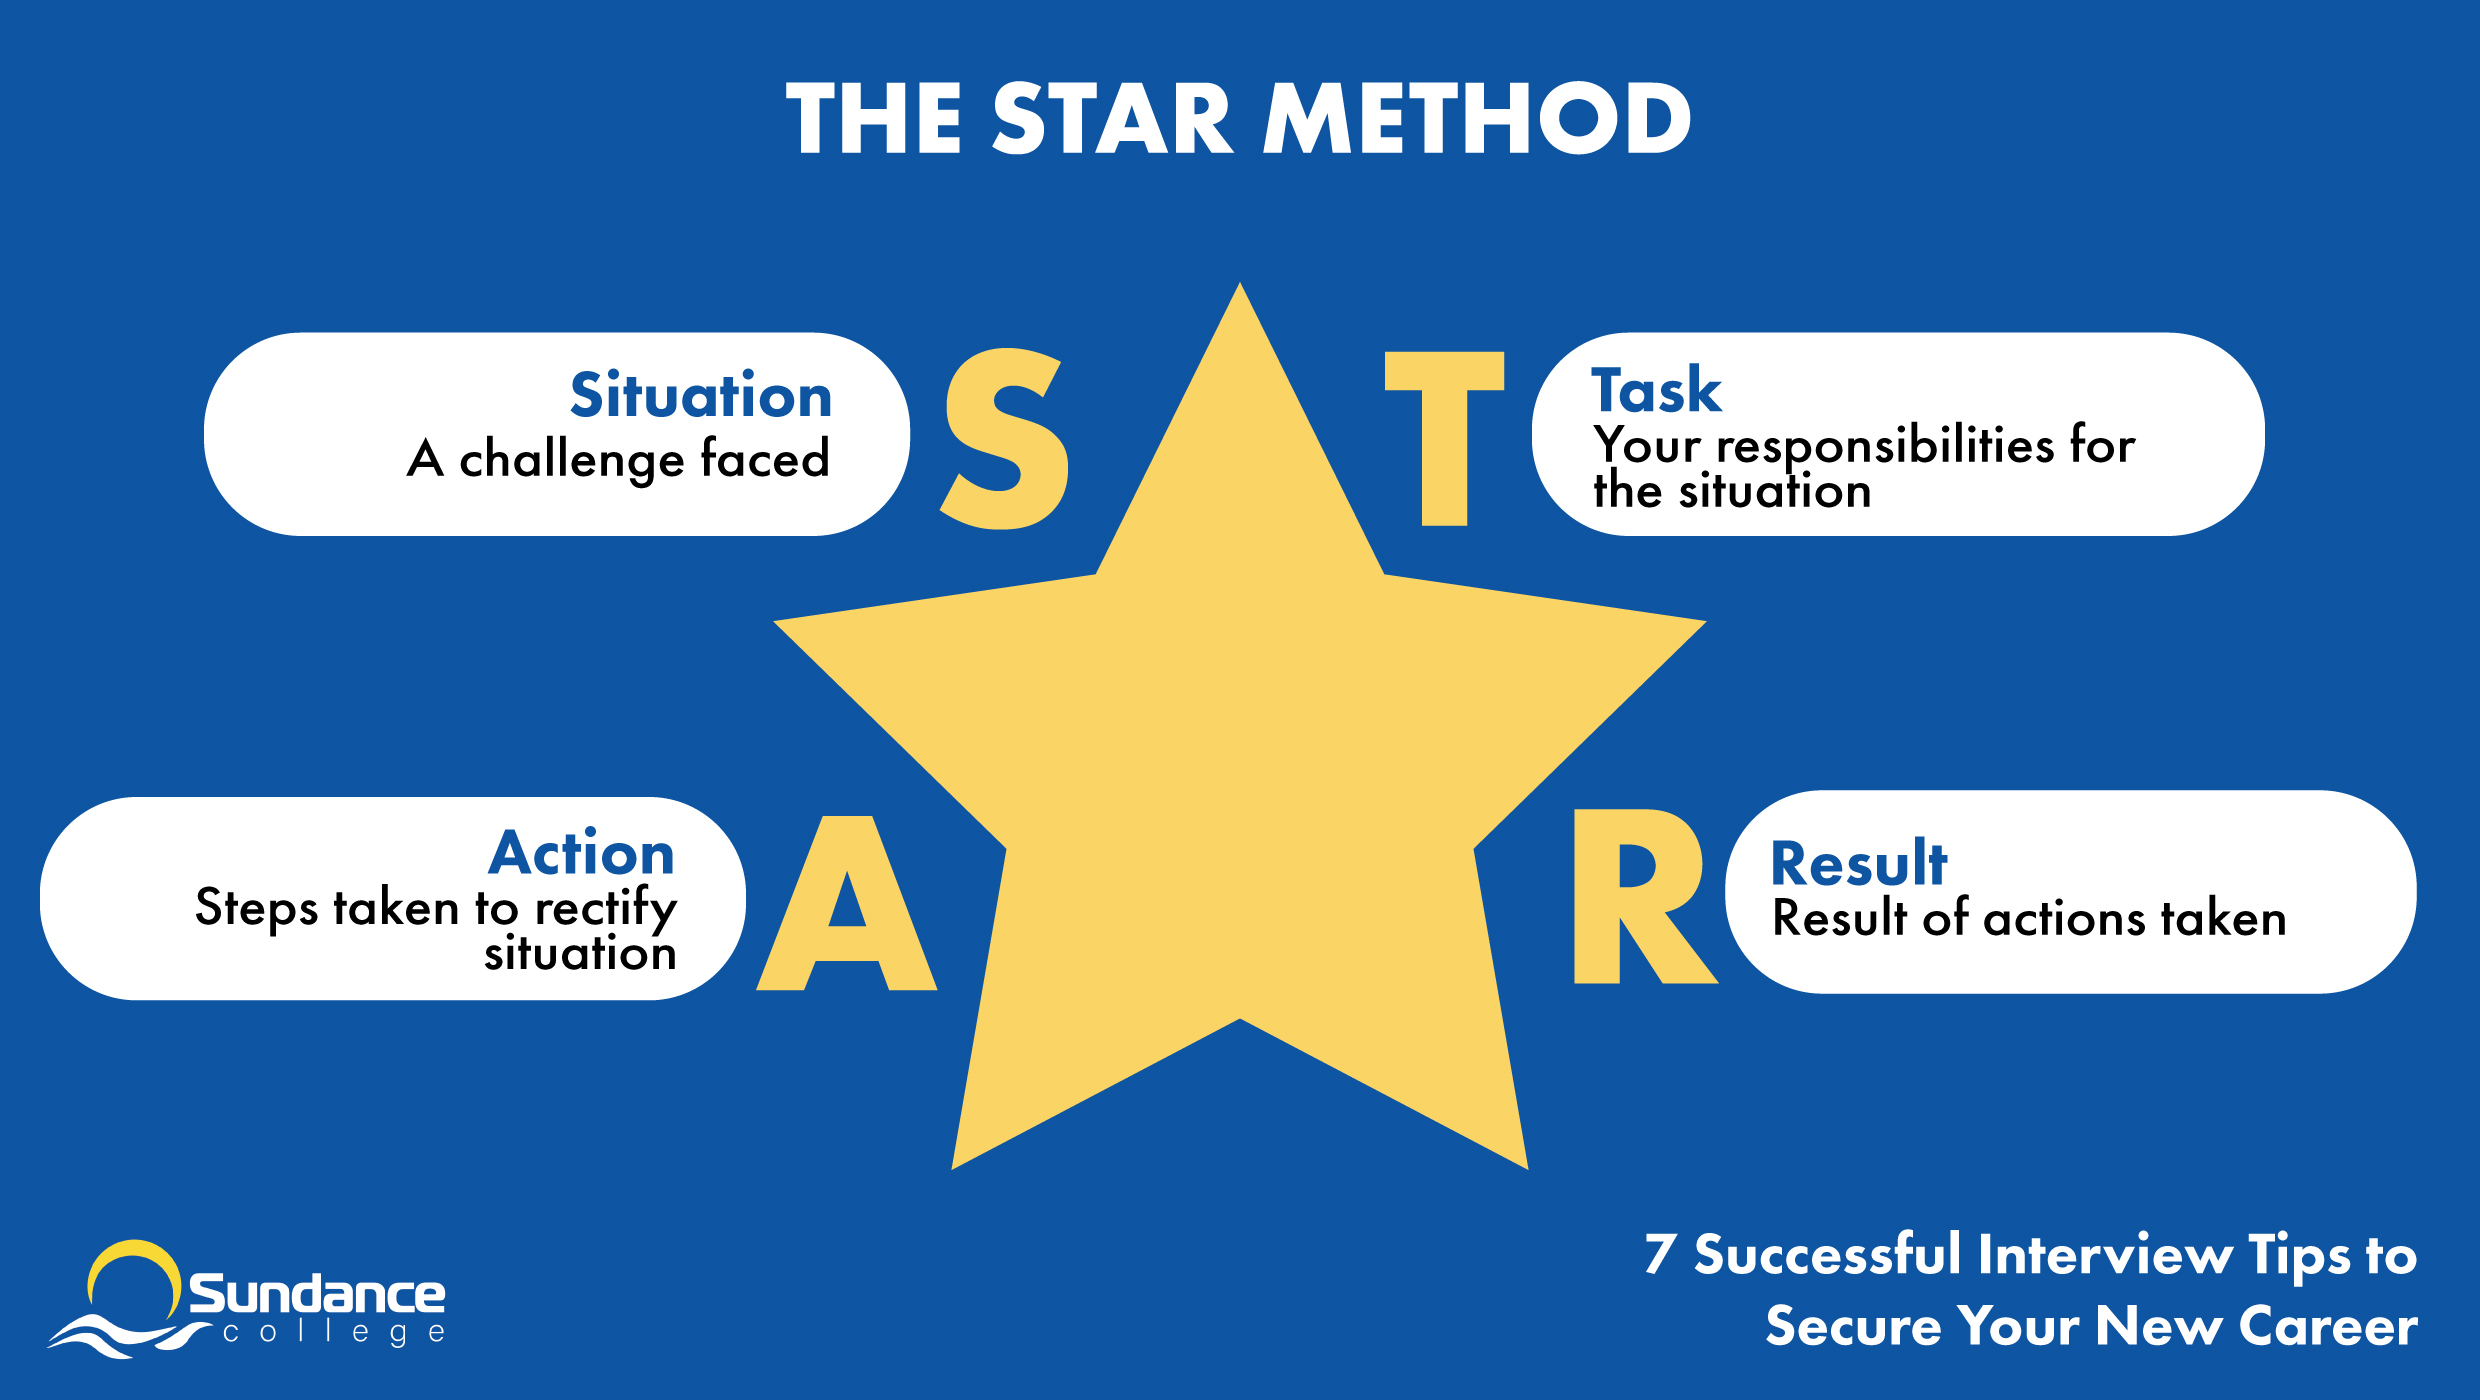 Image showing the STAR method for answering behavioral interview questions; the terms Situation, Task, Action, and Result are clustered around a star